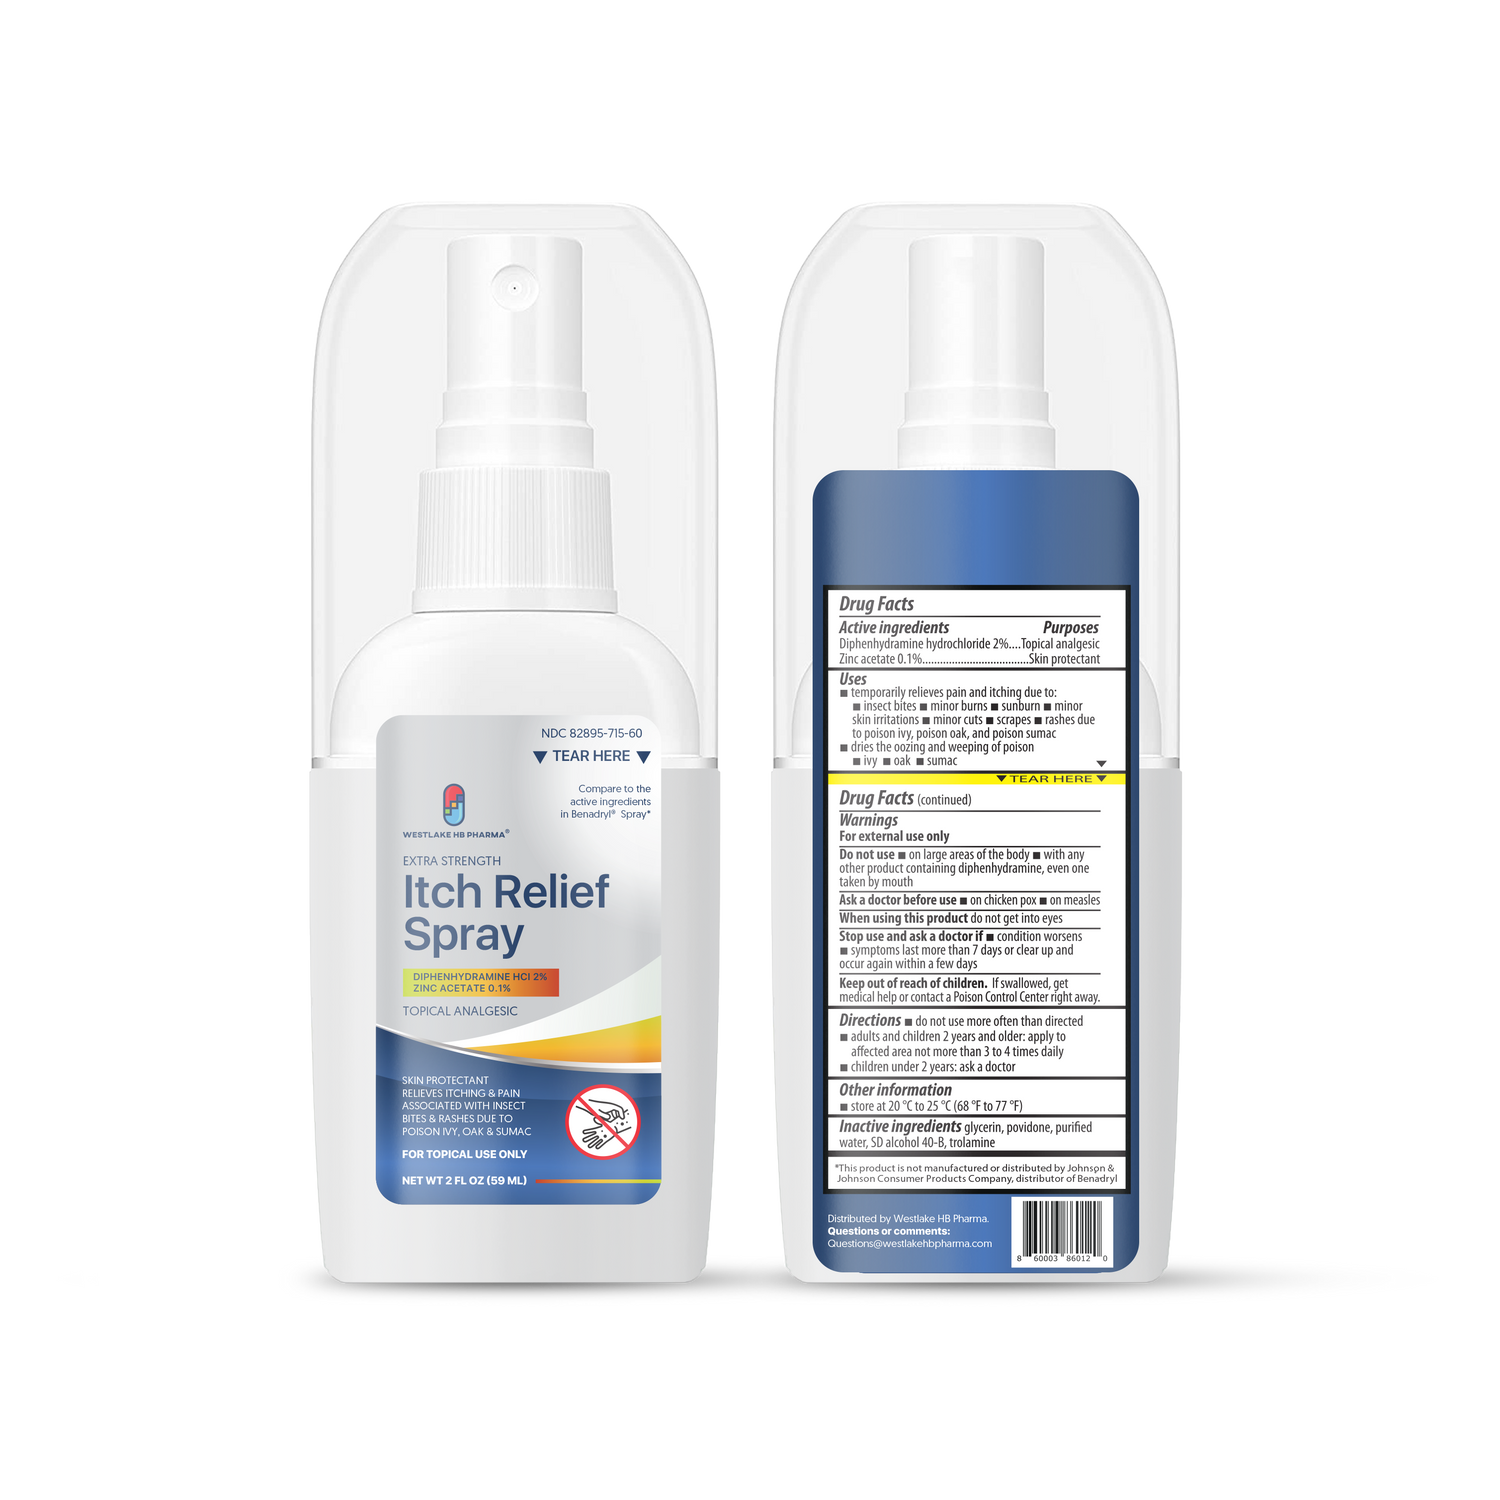 Westlake Extra Strength Itch Relief Spray | Relieves Pain and Itching of Insect Bites, Poison Ivy, Sunburn, Minor Cuts - 2PK - Westlake HB Pharma